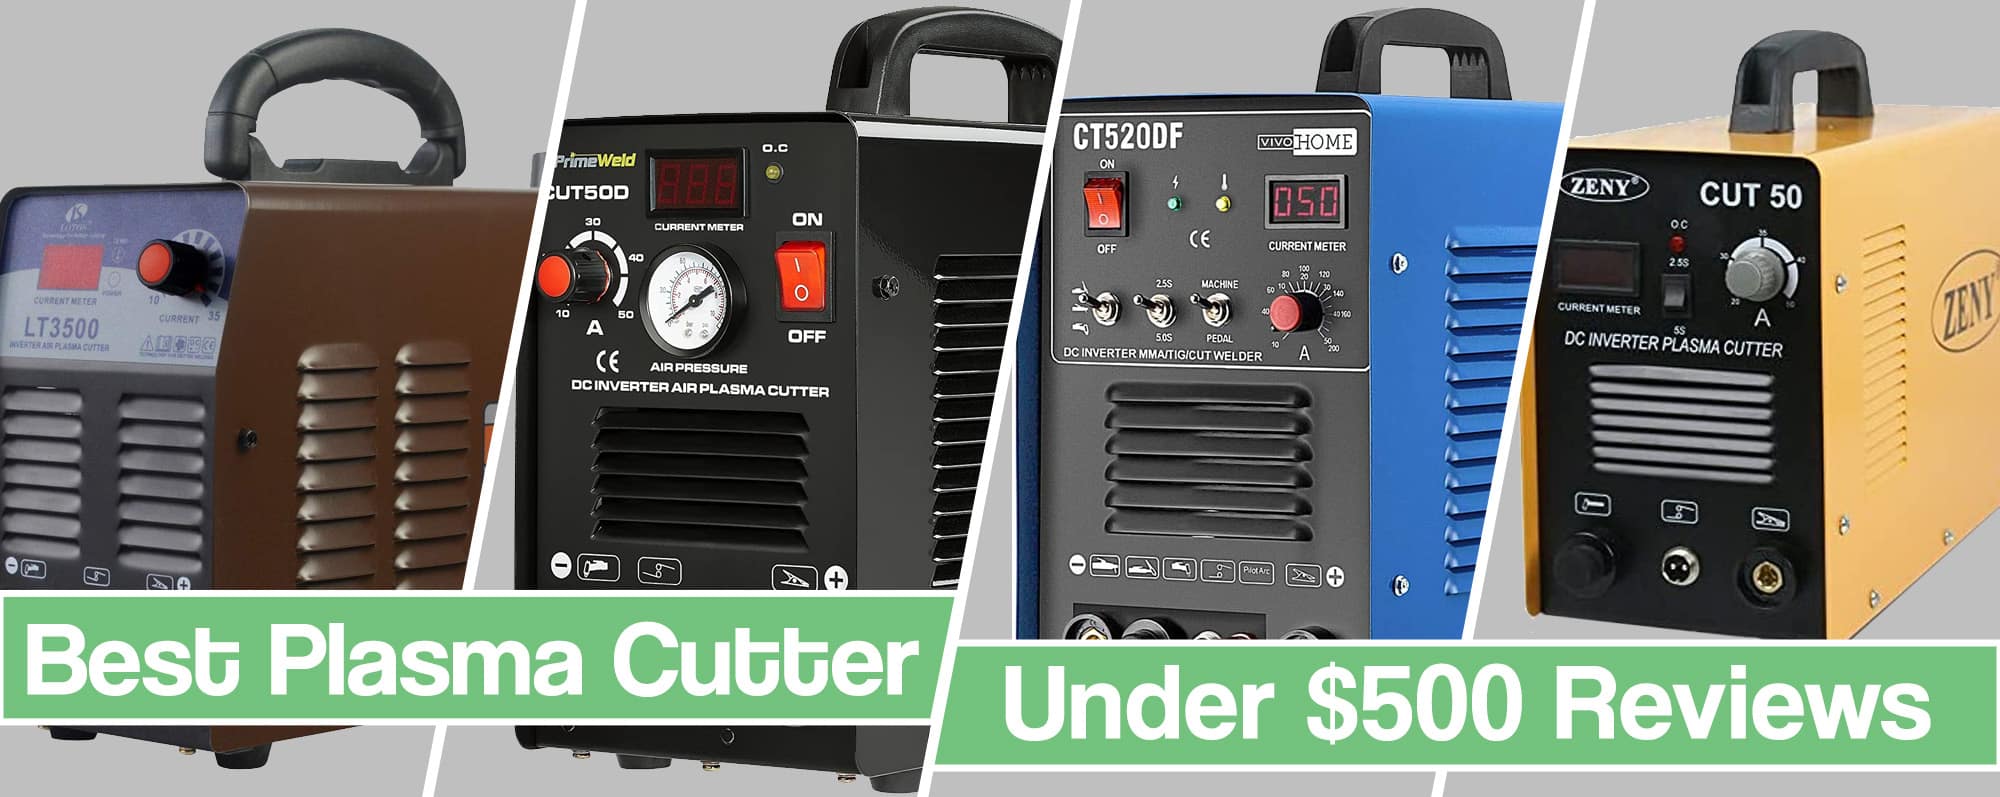 Review of Best Plasma Cutters Under 500, With Comparison Table and Pros & Cons [2022]